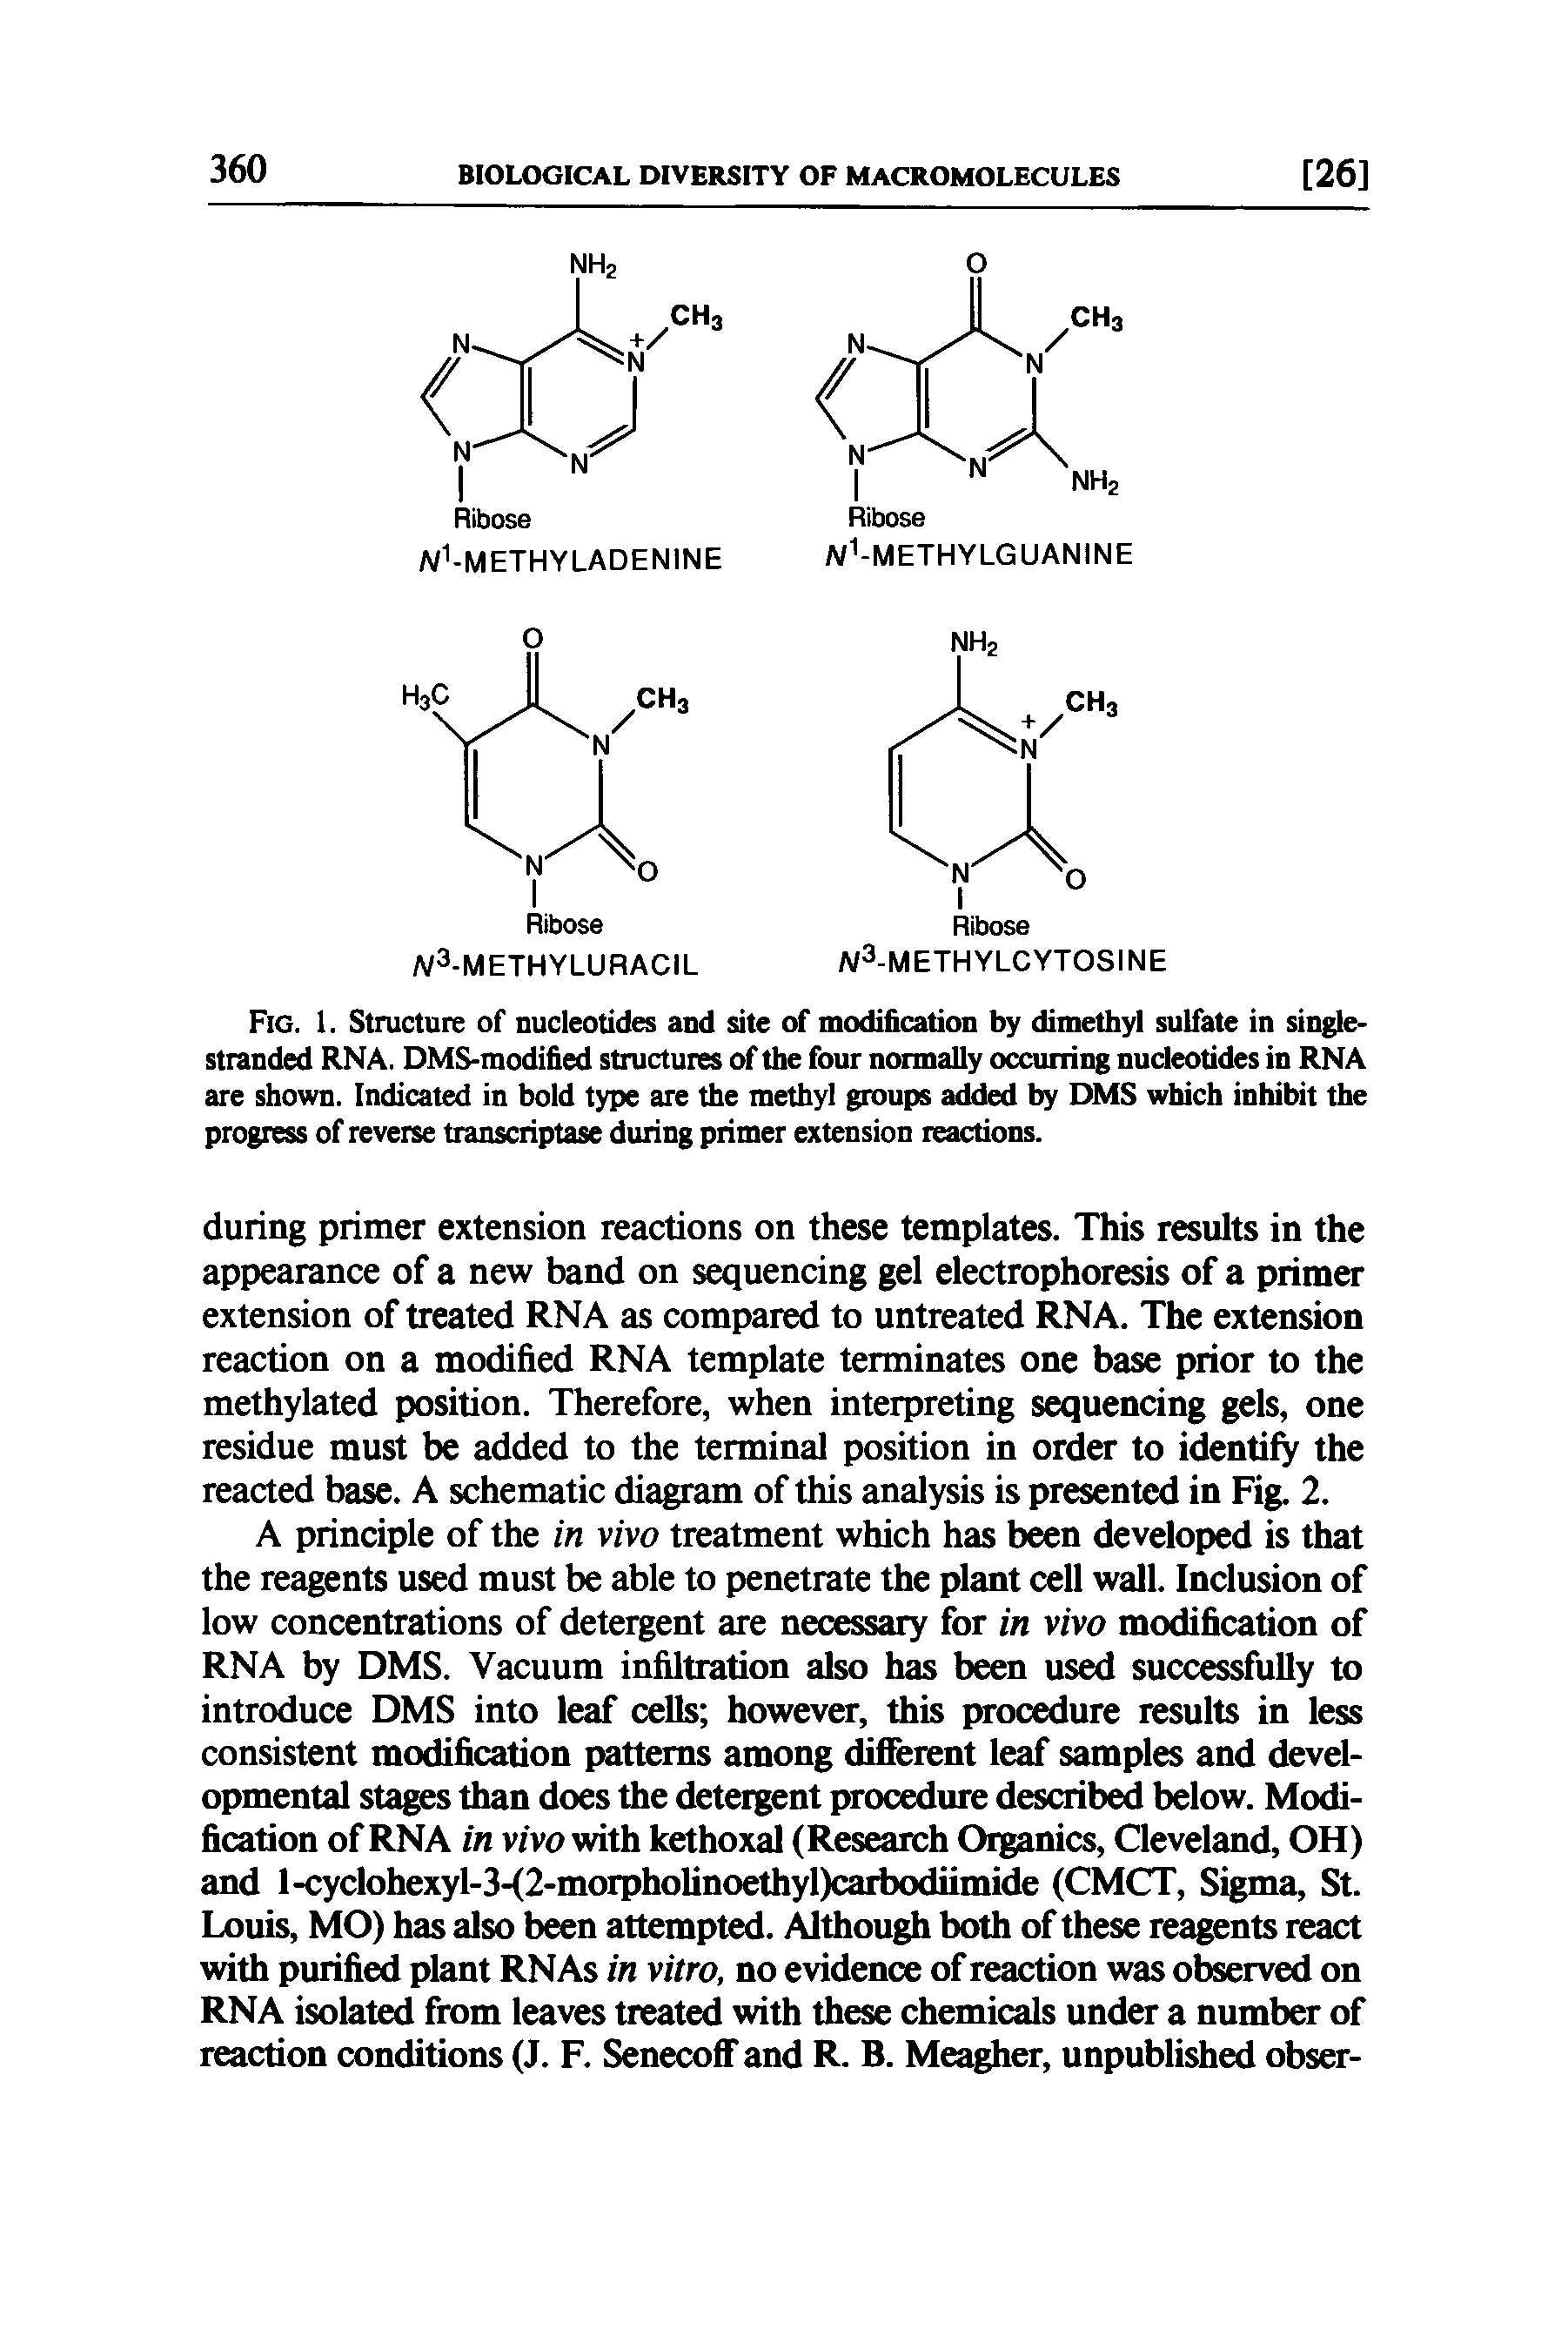 Fig. 1. Structure of nucleotides and site of modification by dimethyl sulfate in single-stranded RNA. DMS-modified structures of the four normally occurring nucleotides in RNA are shown. Indicated in bold type are the methyl groups added by DMS which inhibit the progress of reverse transcriptase during primer extension reactions.